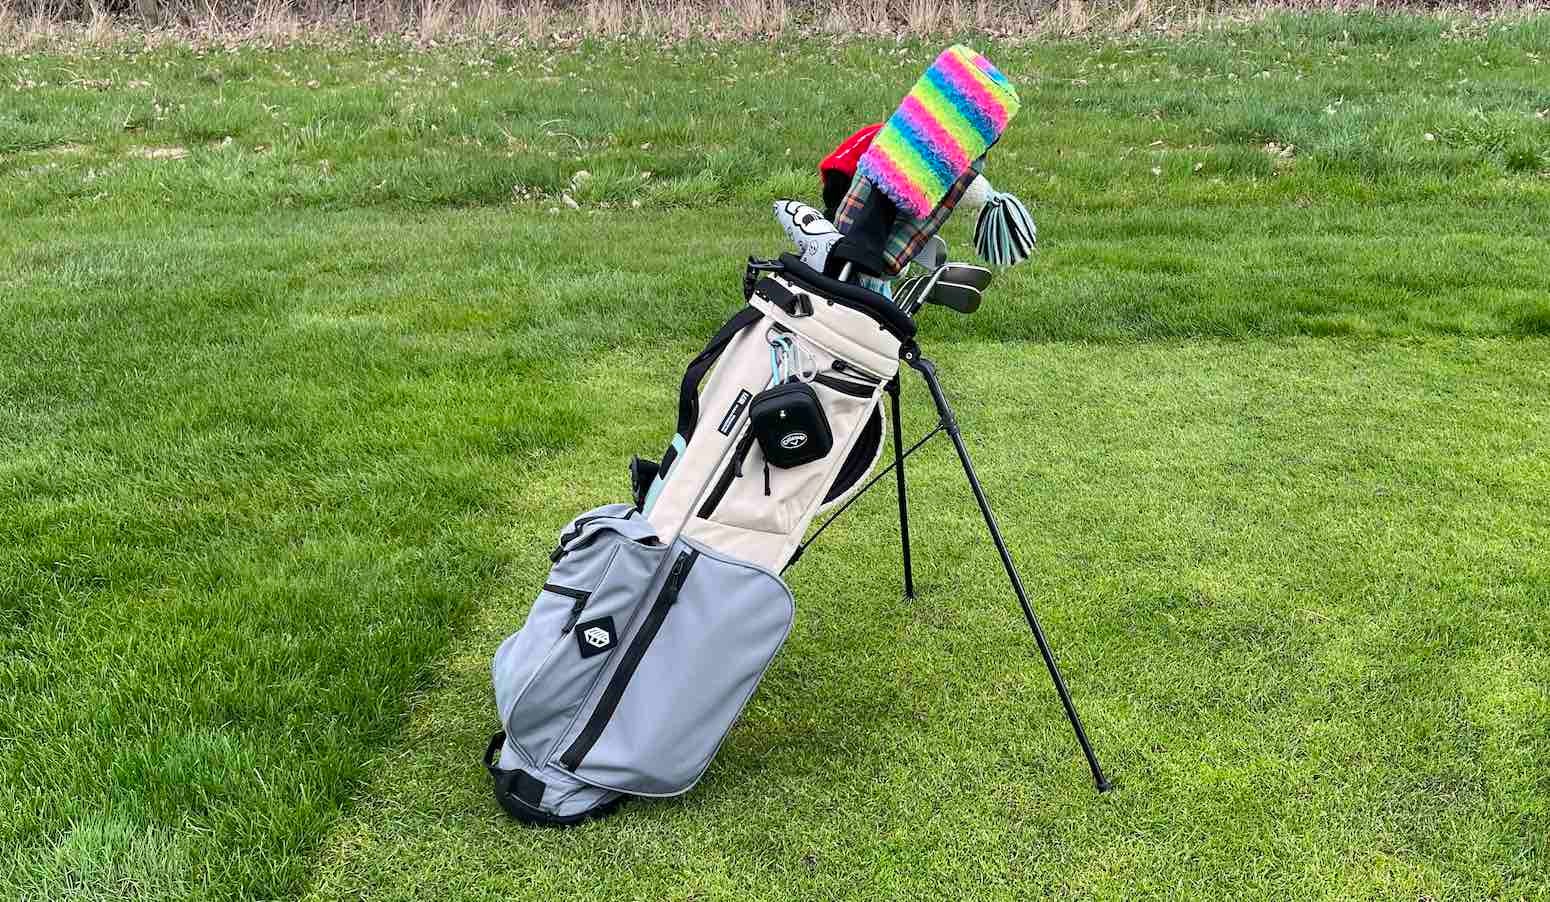 Rover stand bag side from jones